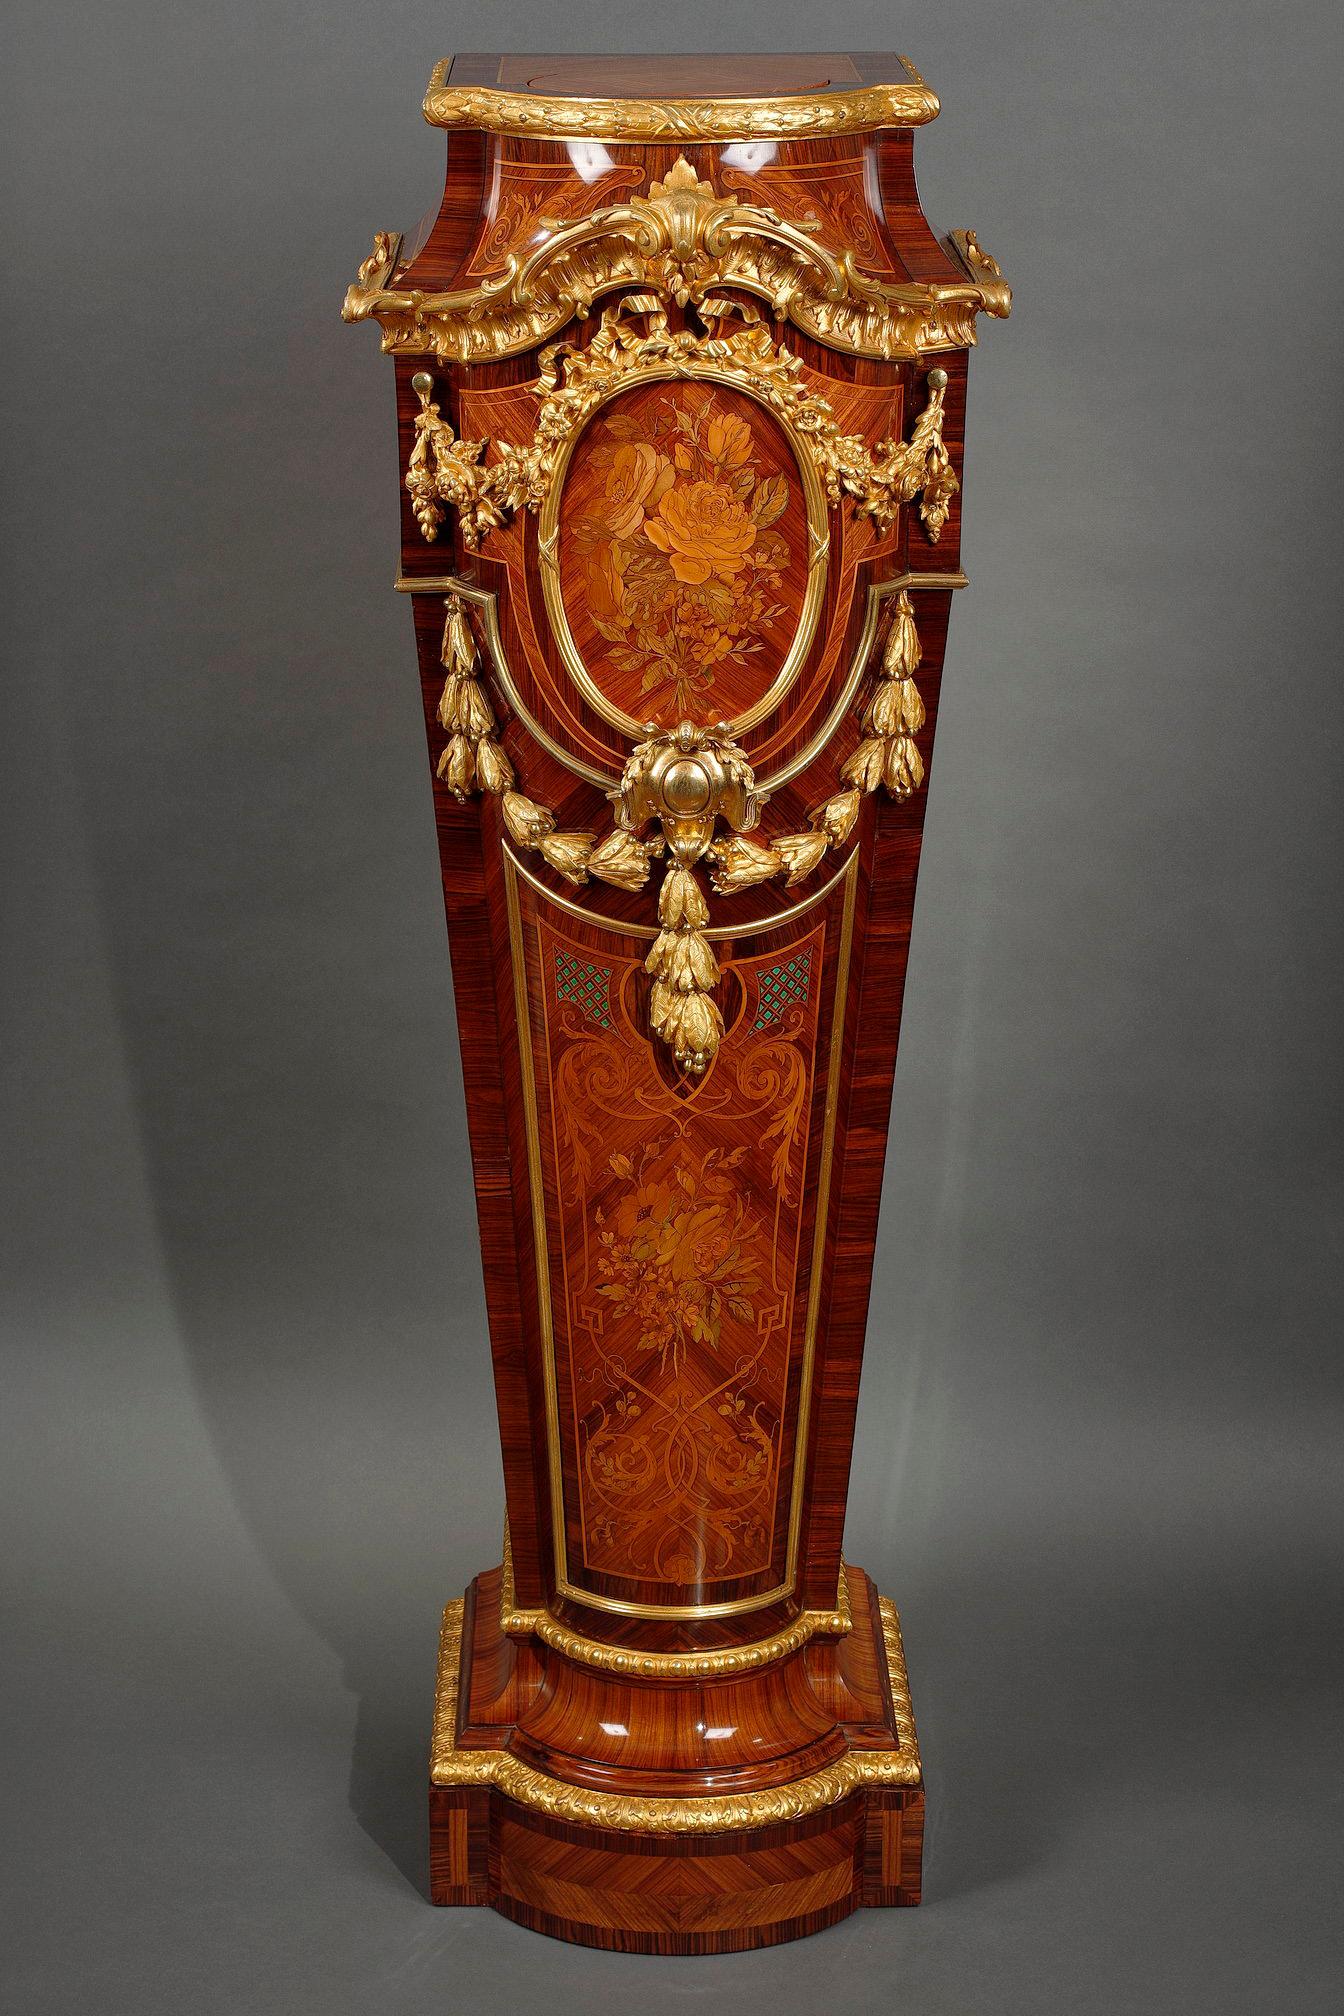 Rare Napoleon III display pedestal with curved front, in wood veneer and chiseled and gilded bronze ornamentation. Topped by a rotating circular top underlined by a frieze of laurels, it is decorated on three sides with floral marquetry and